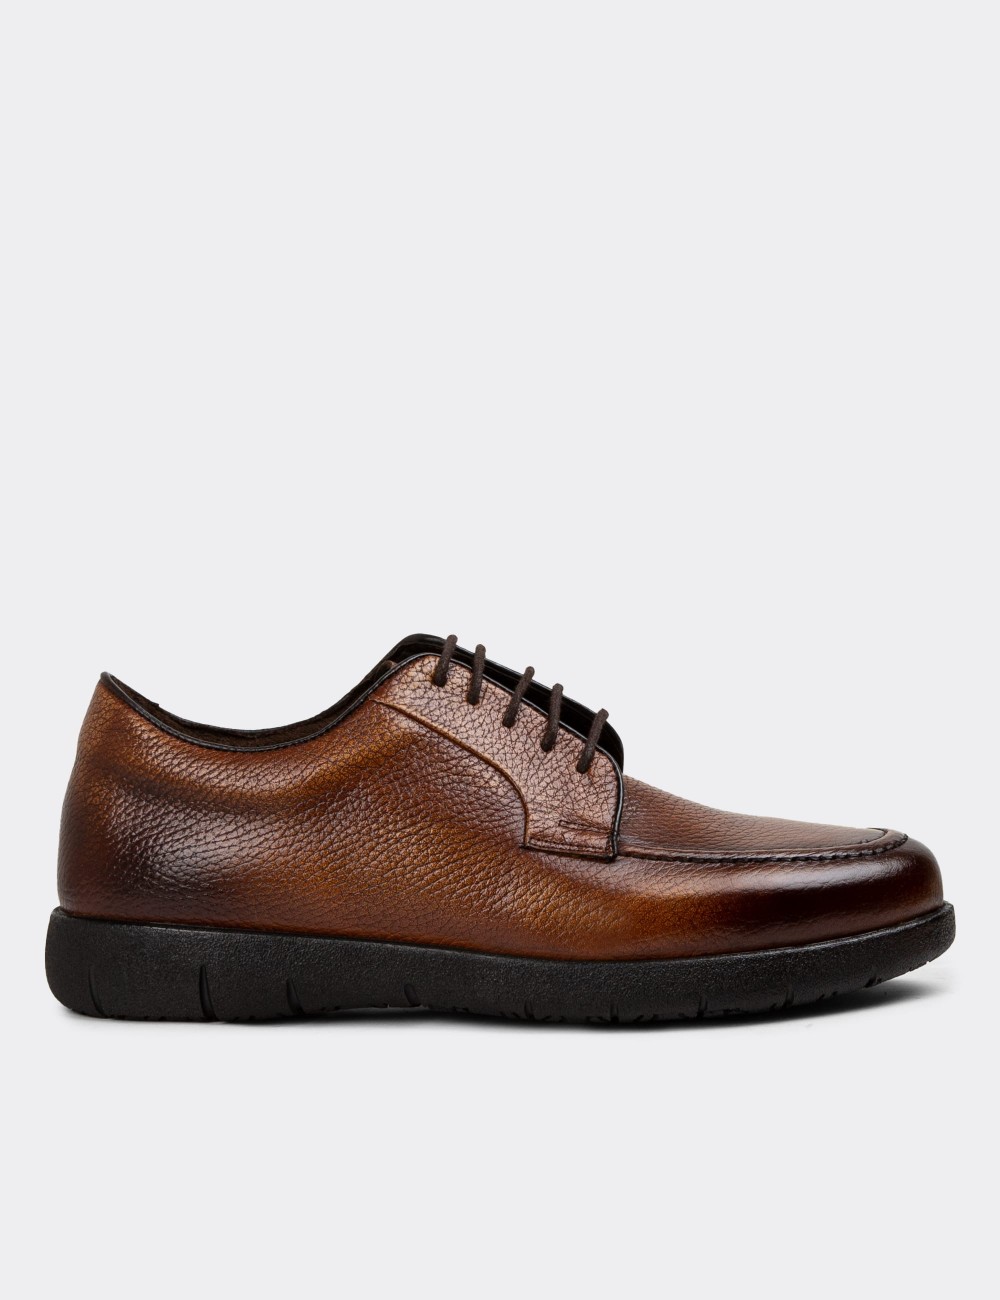 Tan Leather Lace-up Shoes - 01930MTBAC02